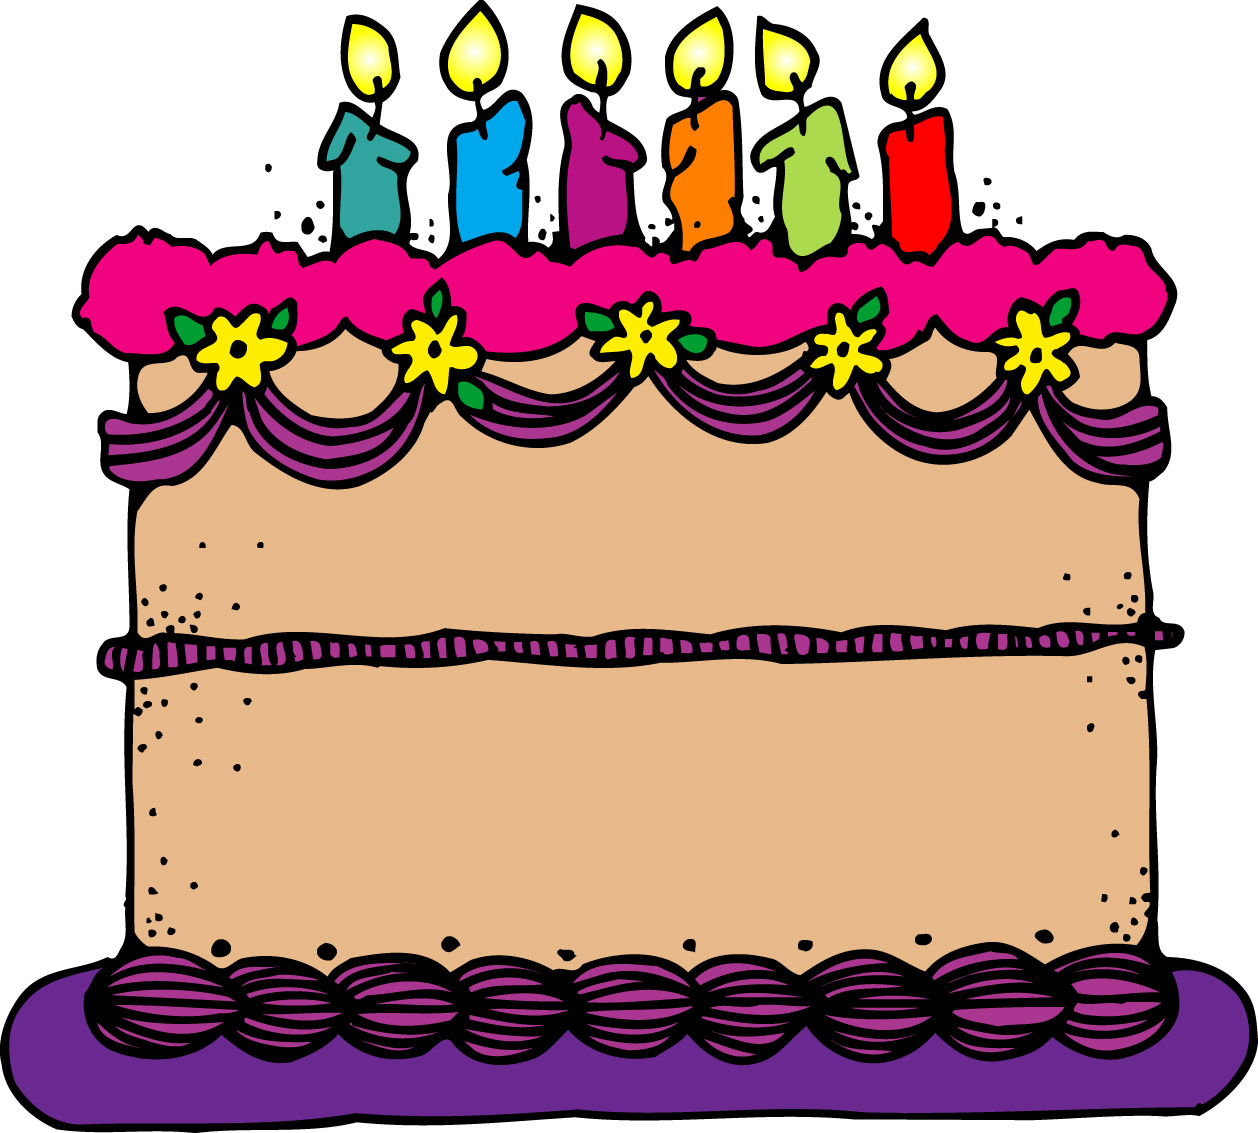 Birthday Cakes Clip Art Images - ClipArt Best